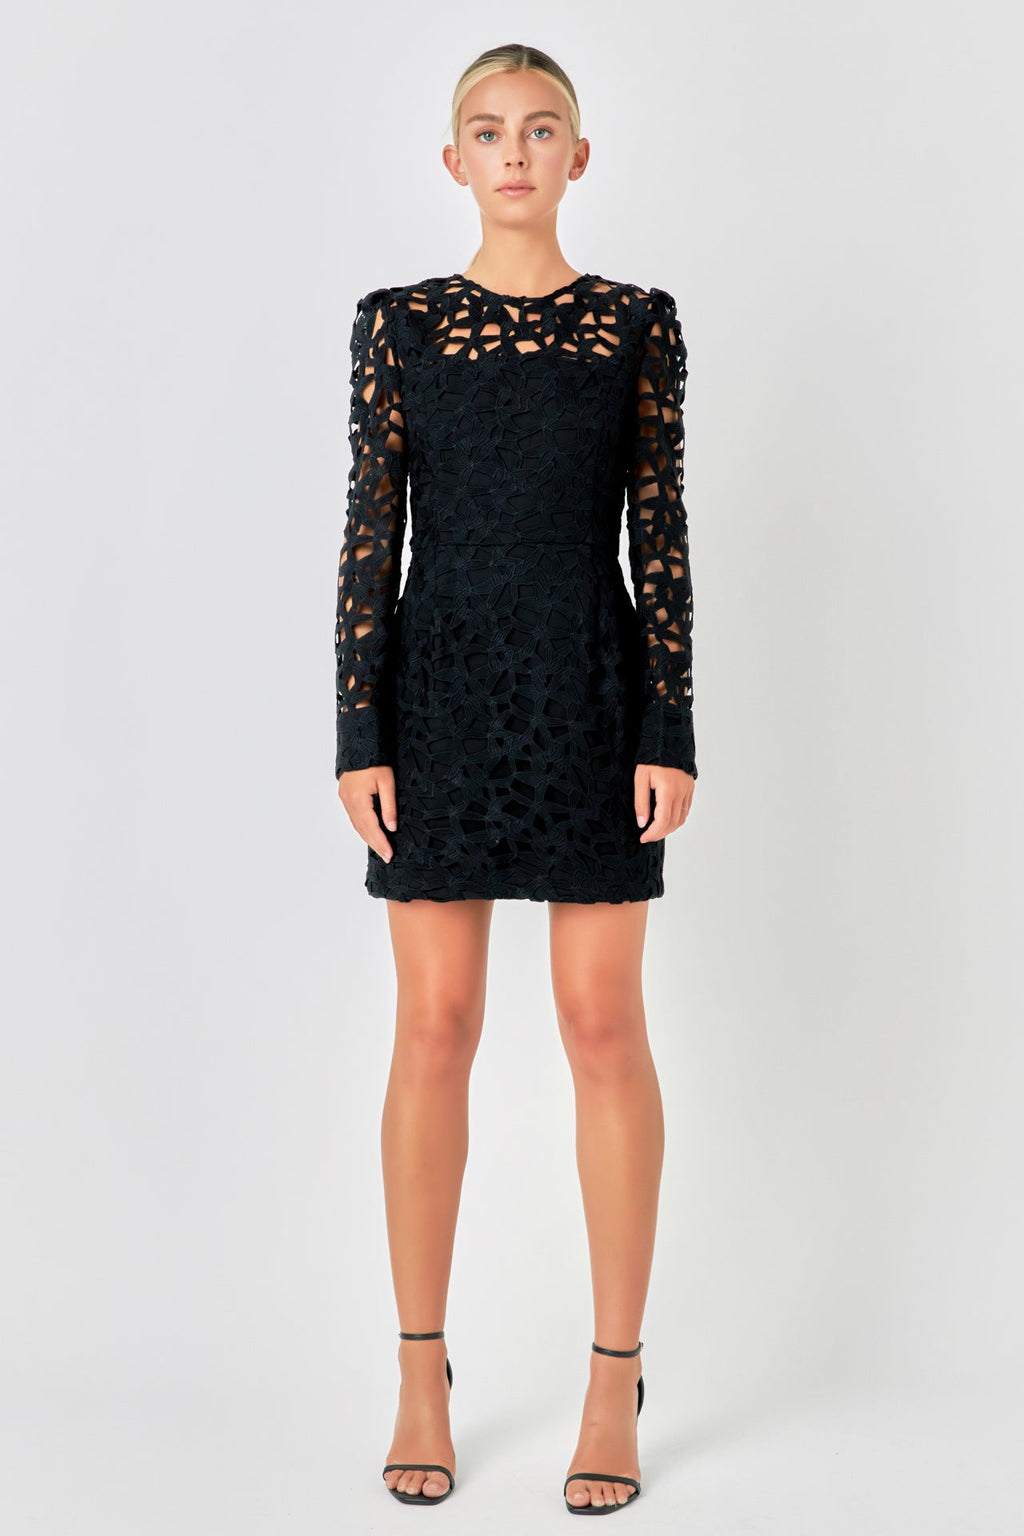 ENDLESS ROSE-Eyelet Structured Mini Dress-DRESSES available at Objectrare